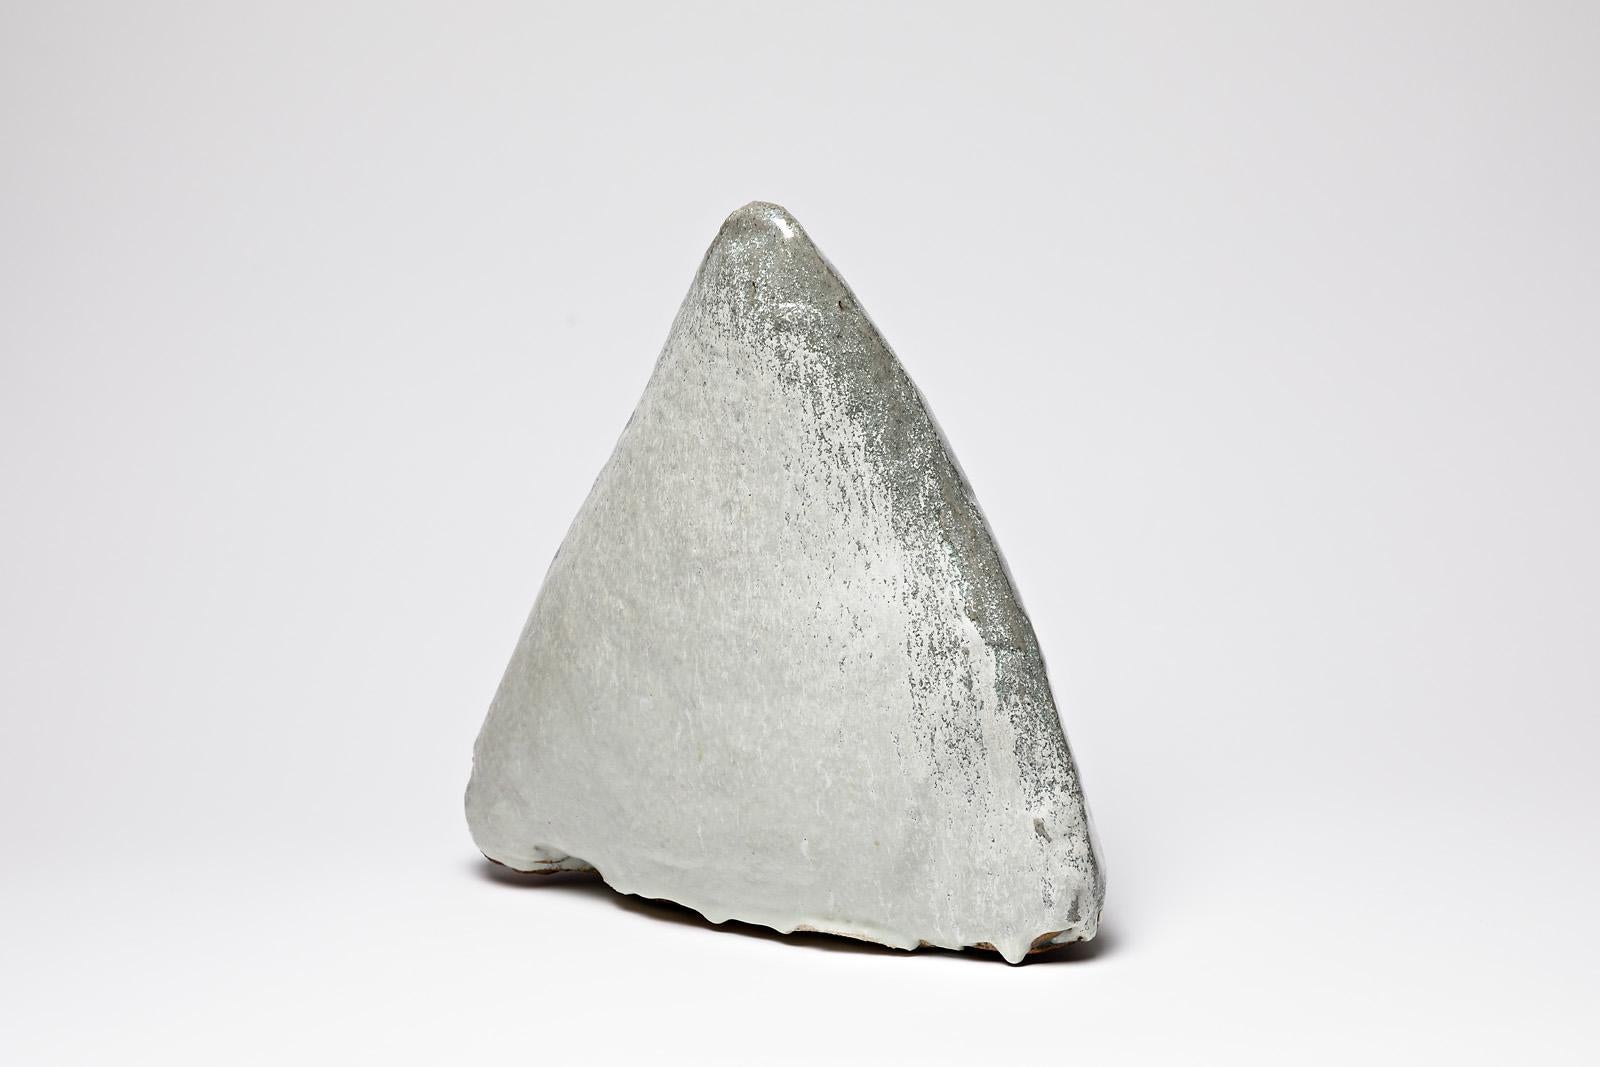 20th Century White and Grey Stoneware Ceramic Sculpture by Bernard Dejonghe Contemporary Art For Sale